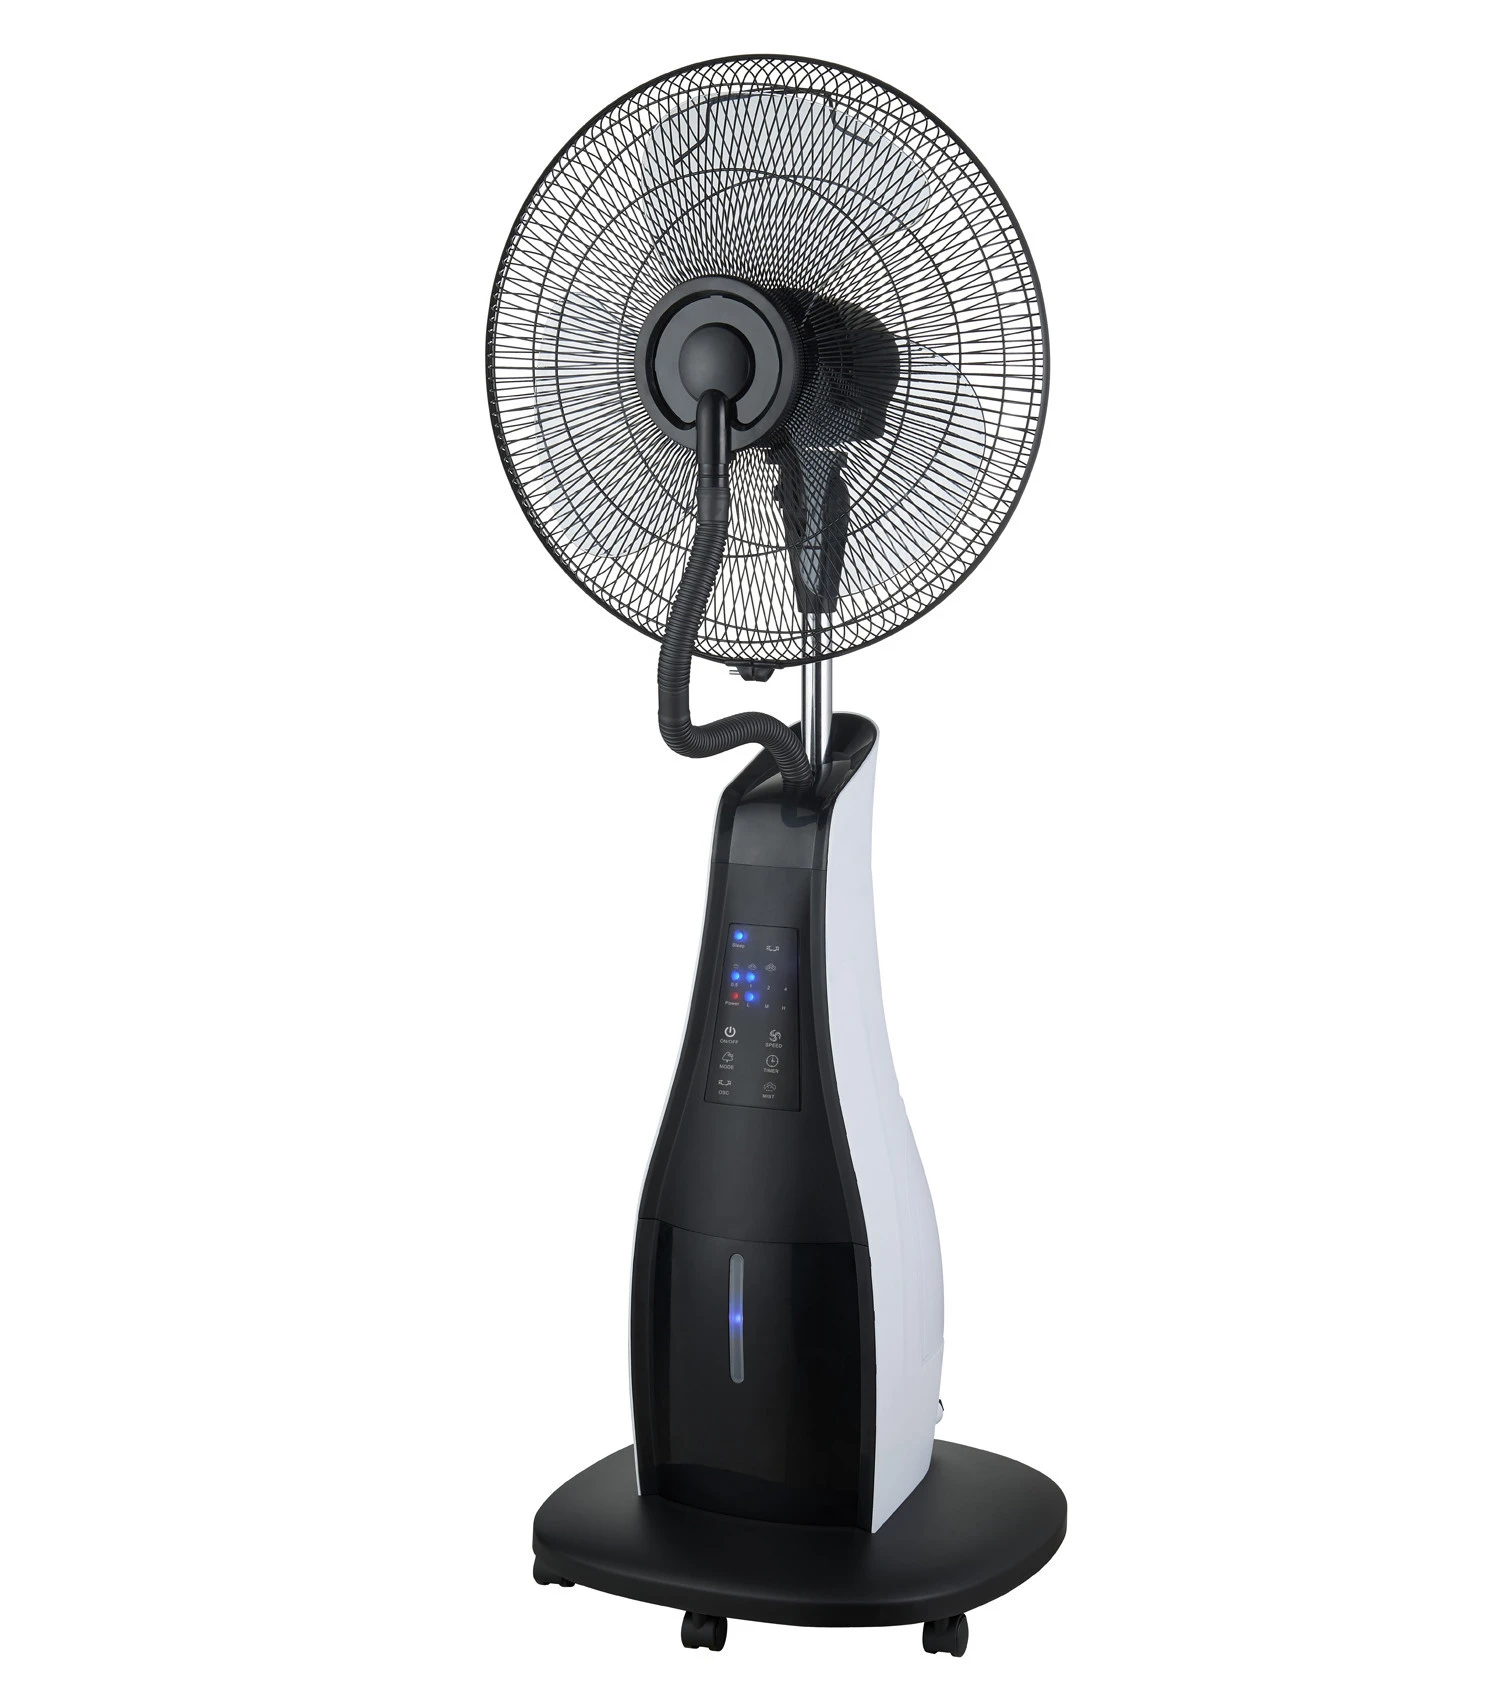 Outdoor Mist Spray Cooler Stand Water Cooling Fan